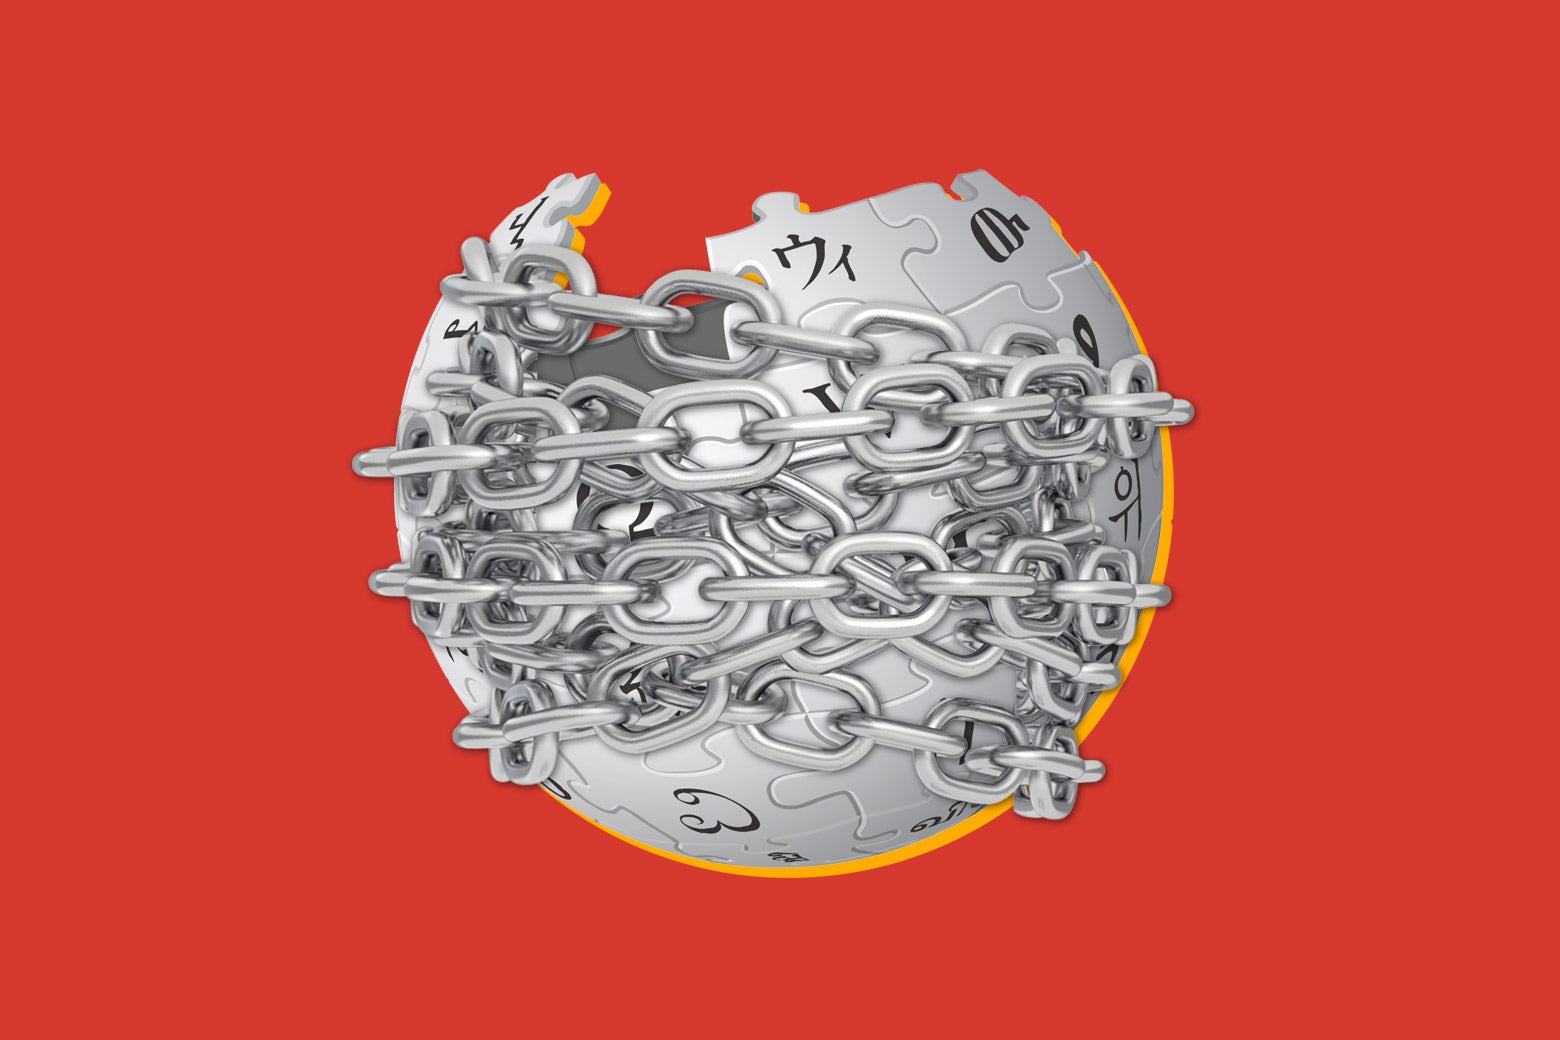 Photo illustration of the Wikipedia puzzle-globe logo wrapped in chains.